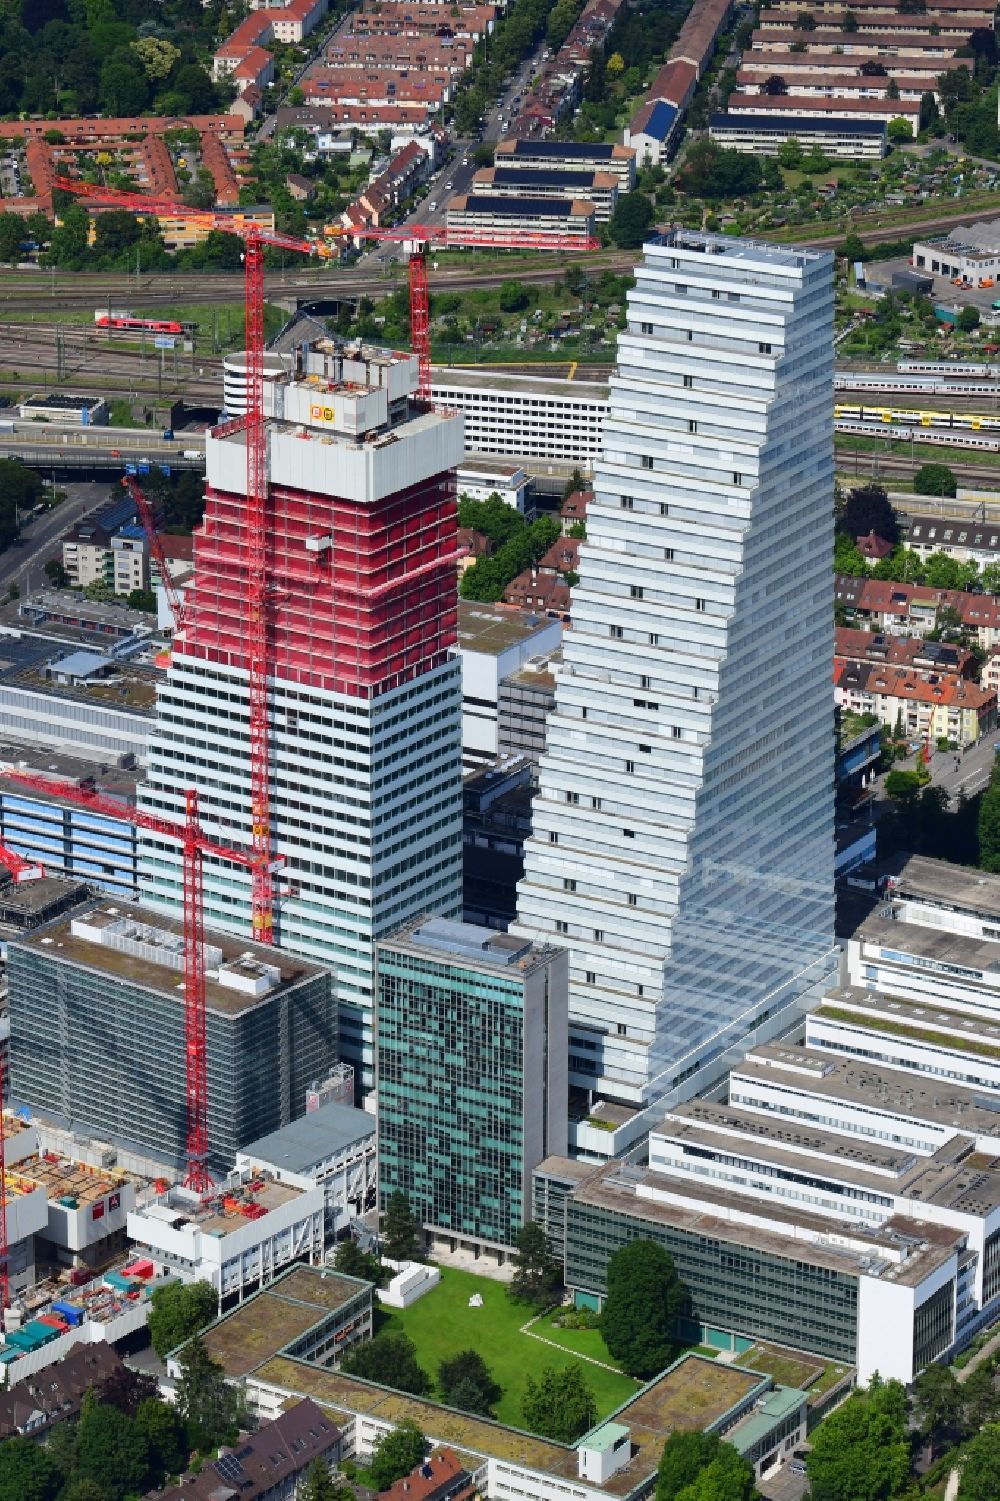 Aerial photograph Basel - Extension construction sites on the premises of the pharmaceutical company Roche with the cityscape-defining high-rise building in Basel in Switzerland. Construction works for the second tower are visible